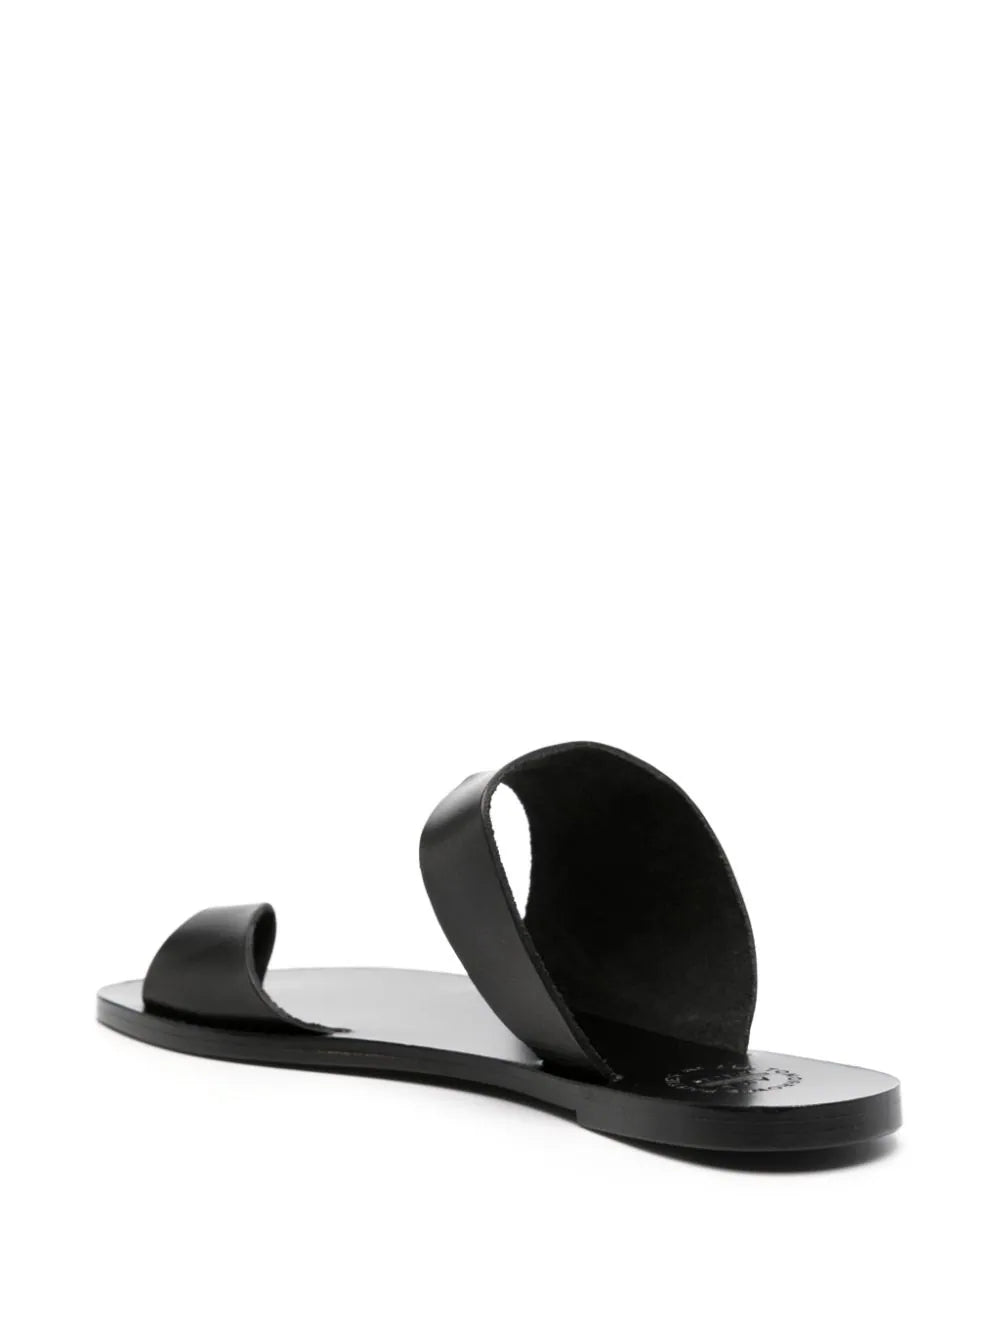 Centola Leather Cutout Sandal in Black